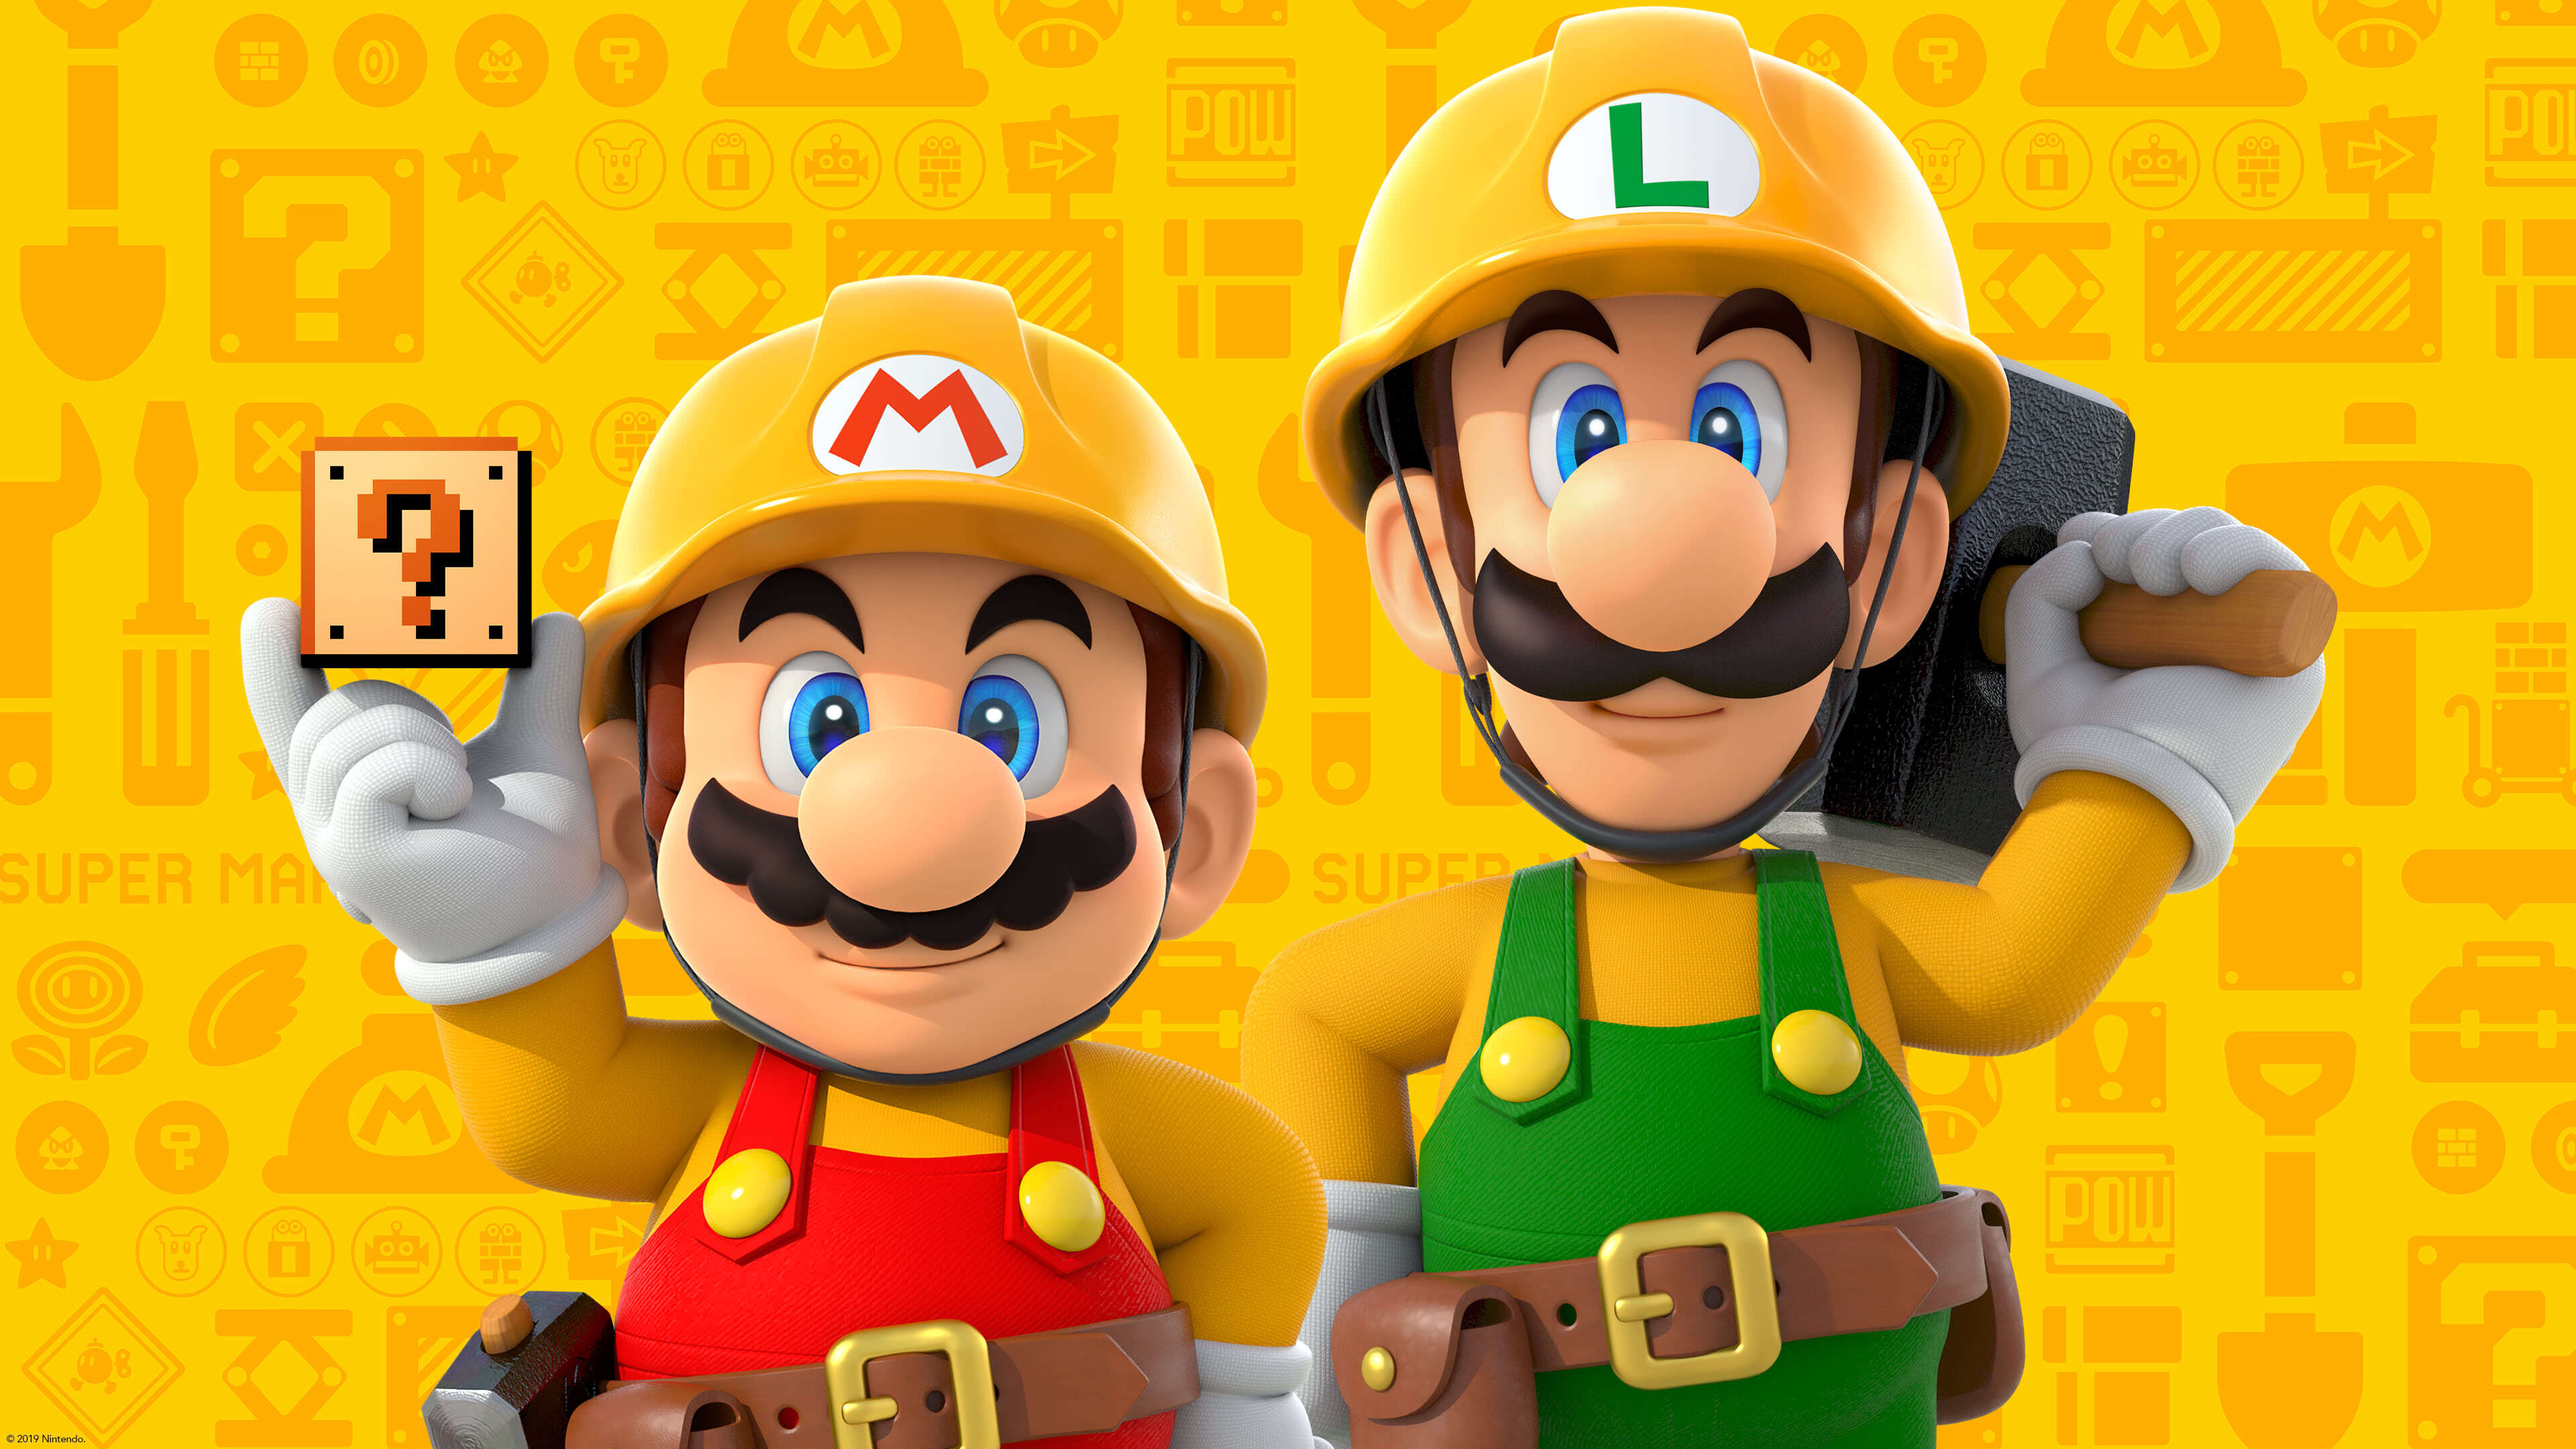 How to download super mario maker 2 on pc for free - trakbxe